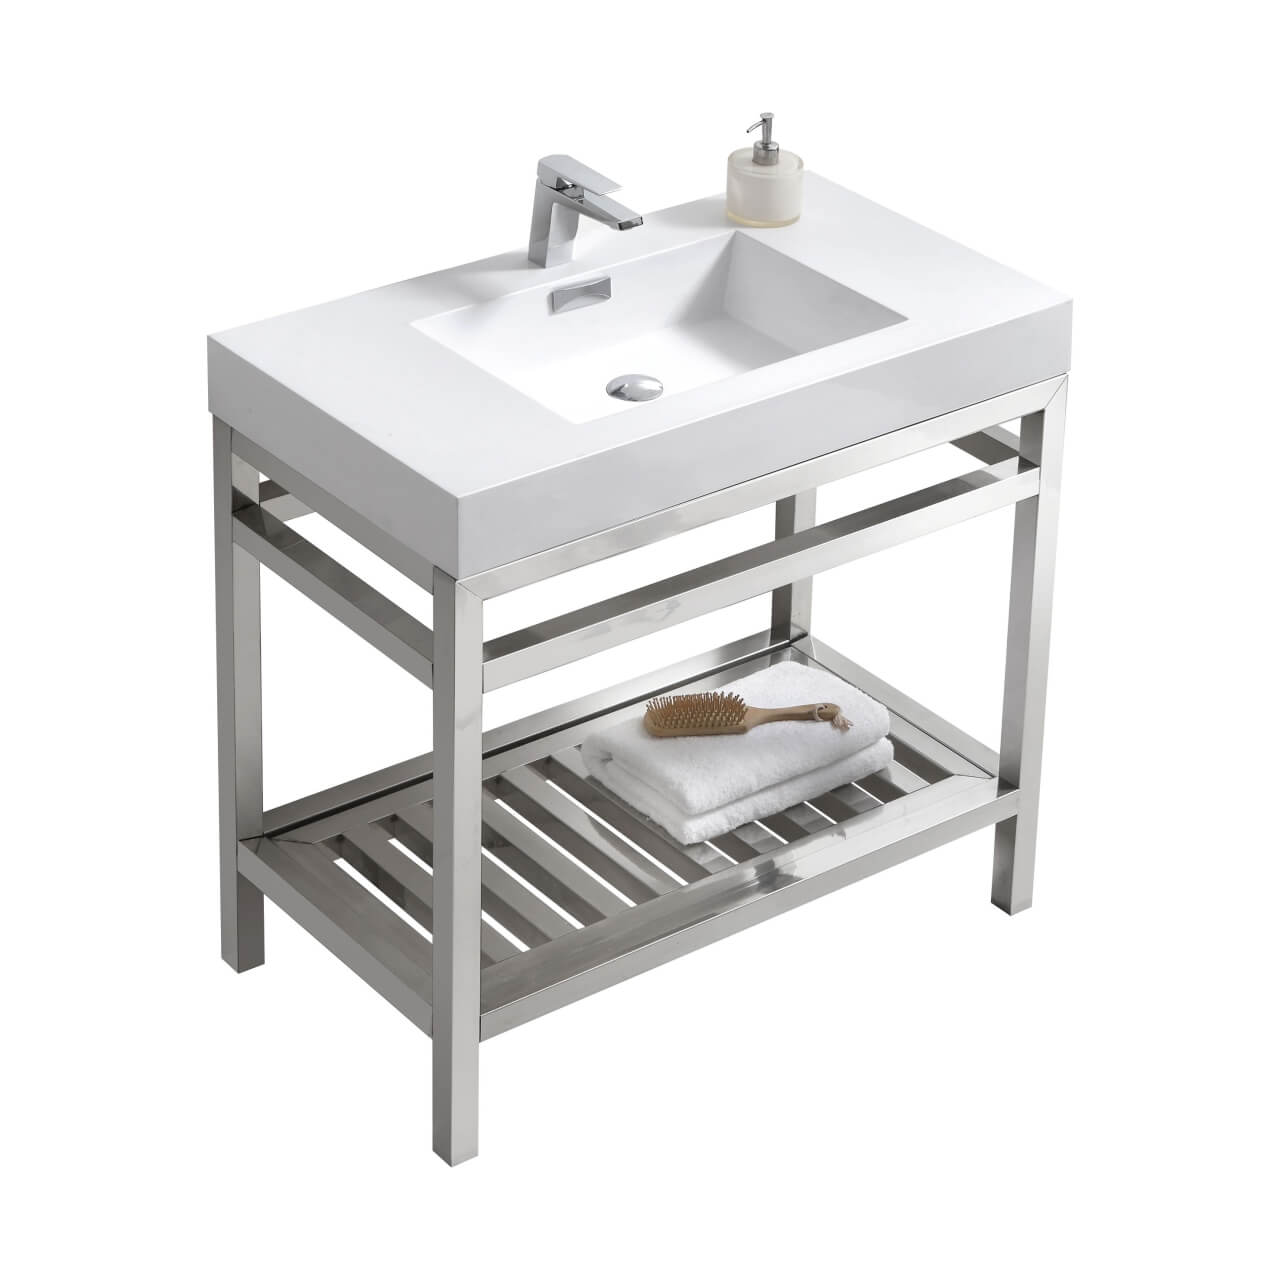 Cisco Stainless Steel Console with Acrylic Sink